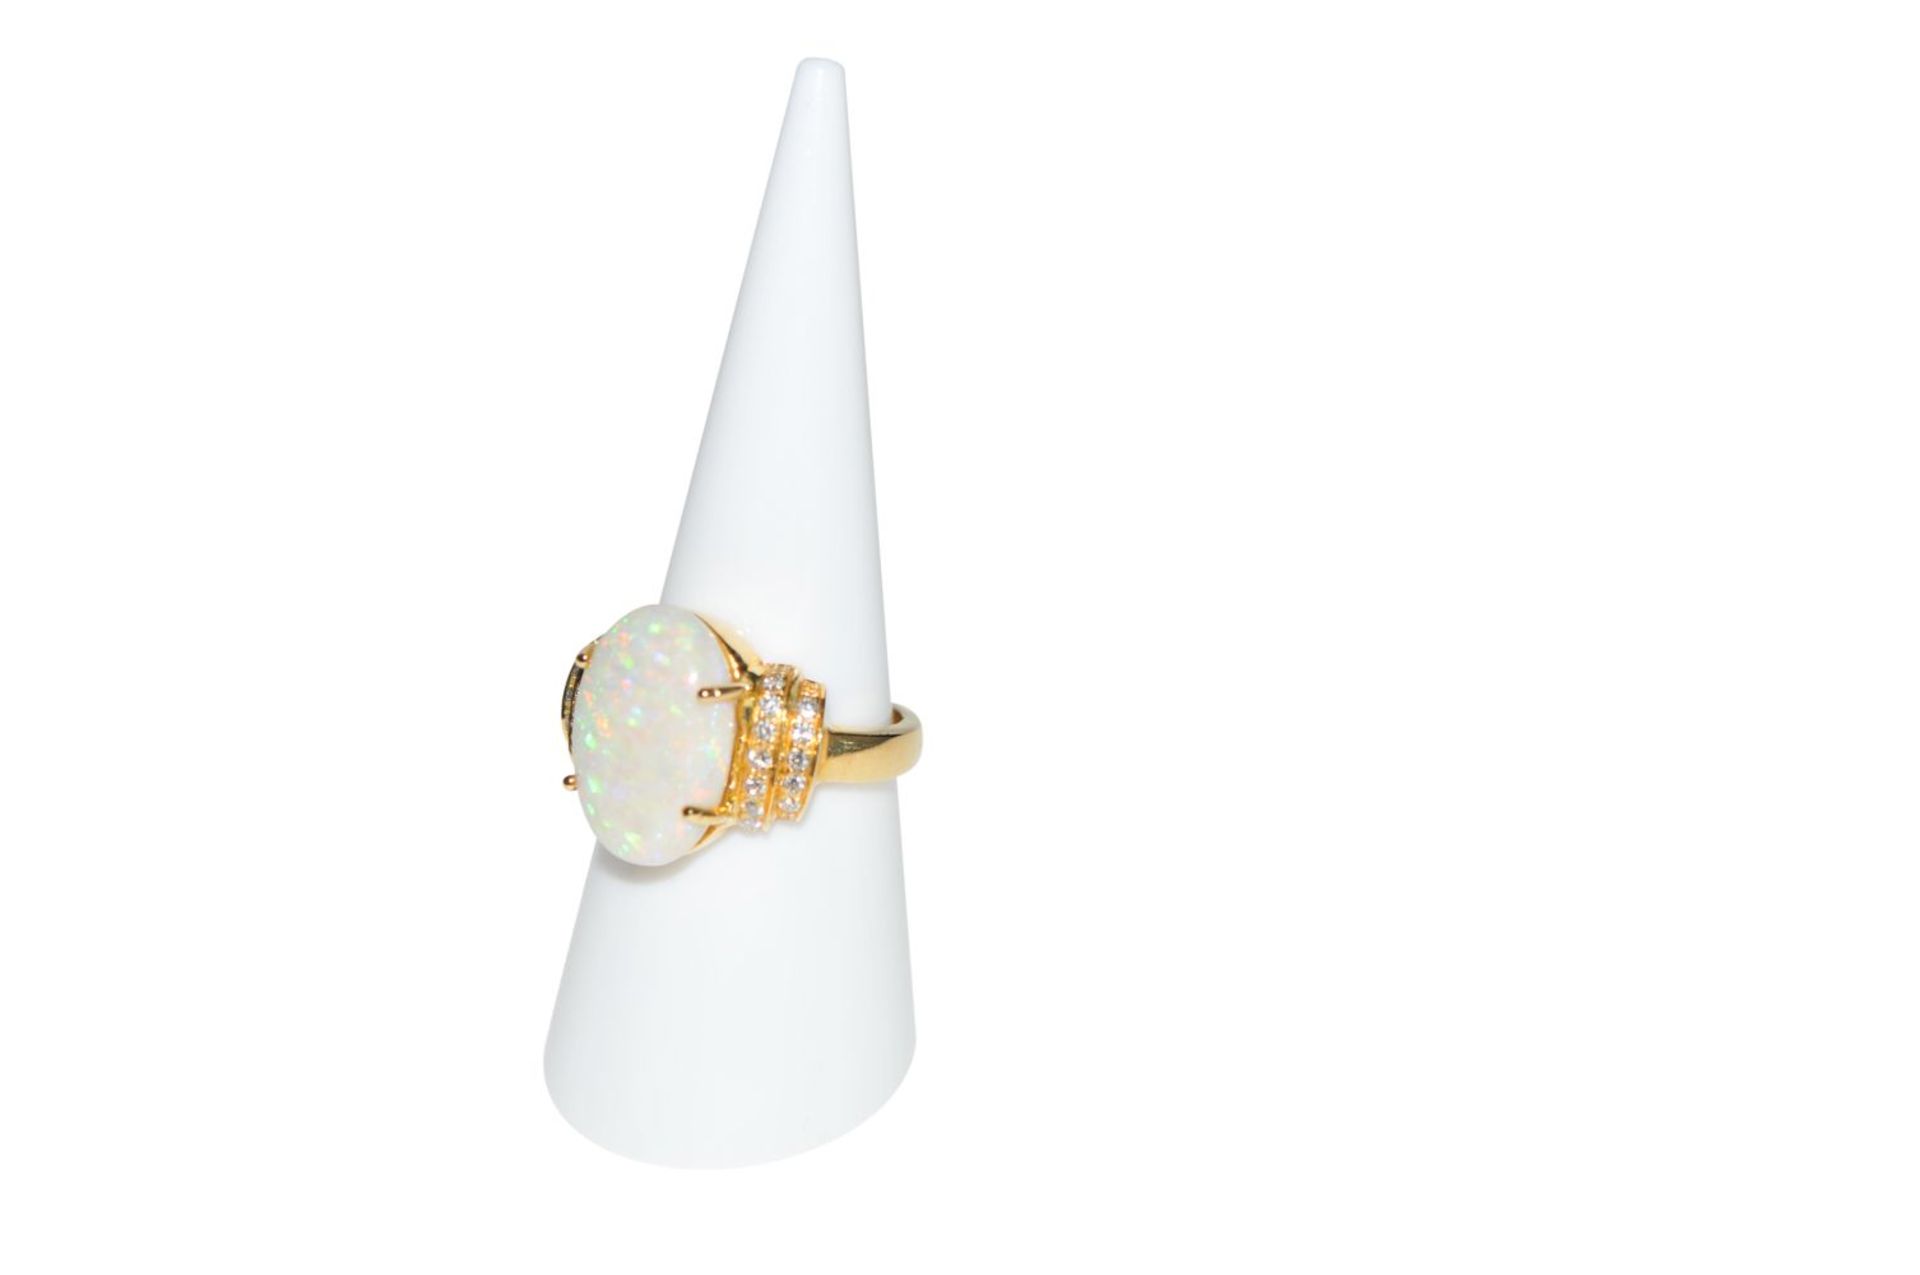 Brilliant ring with opal18Kt gold ring with diamonds total carat weight approx. 0.28ct and an - Bild 2 aus 4